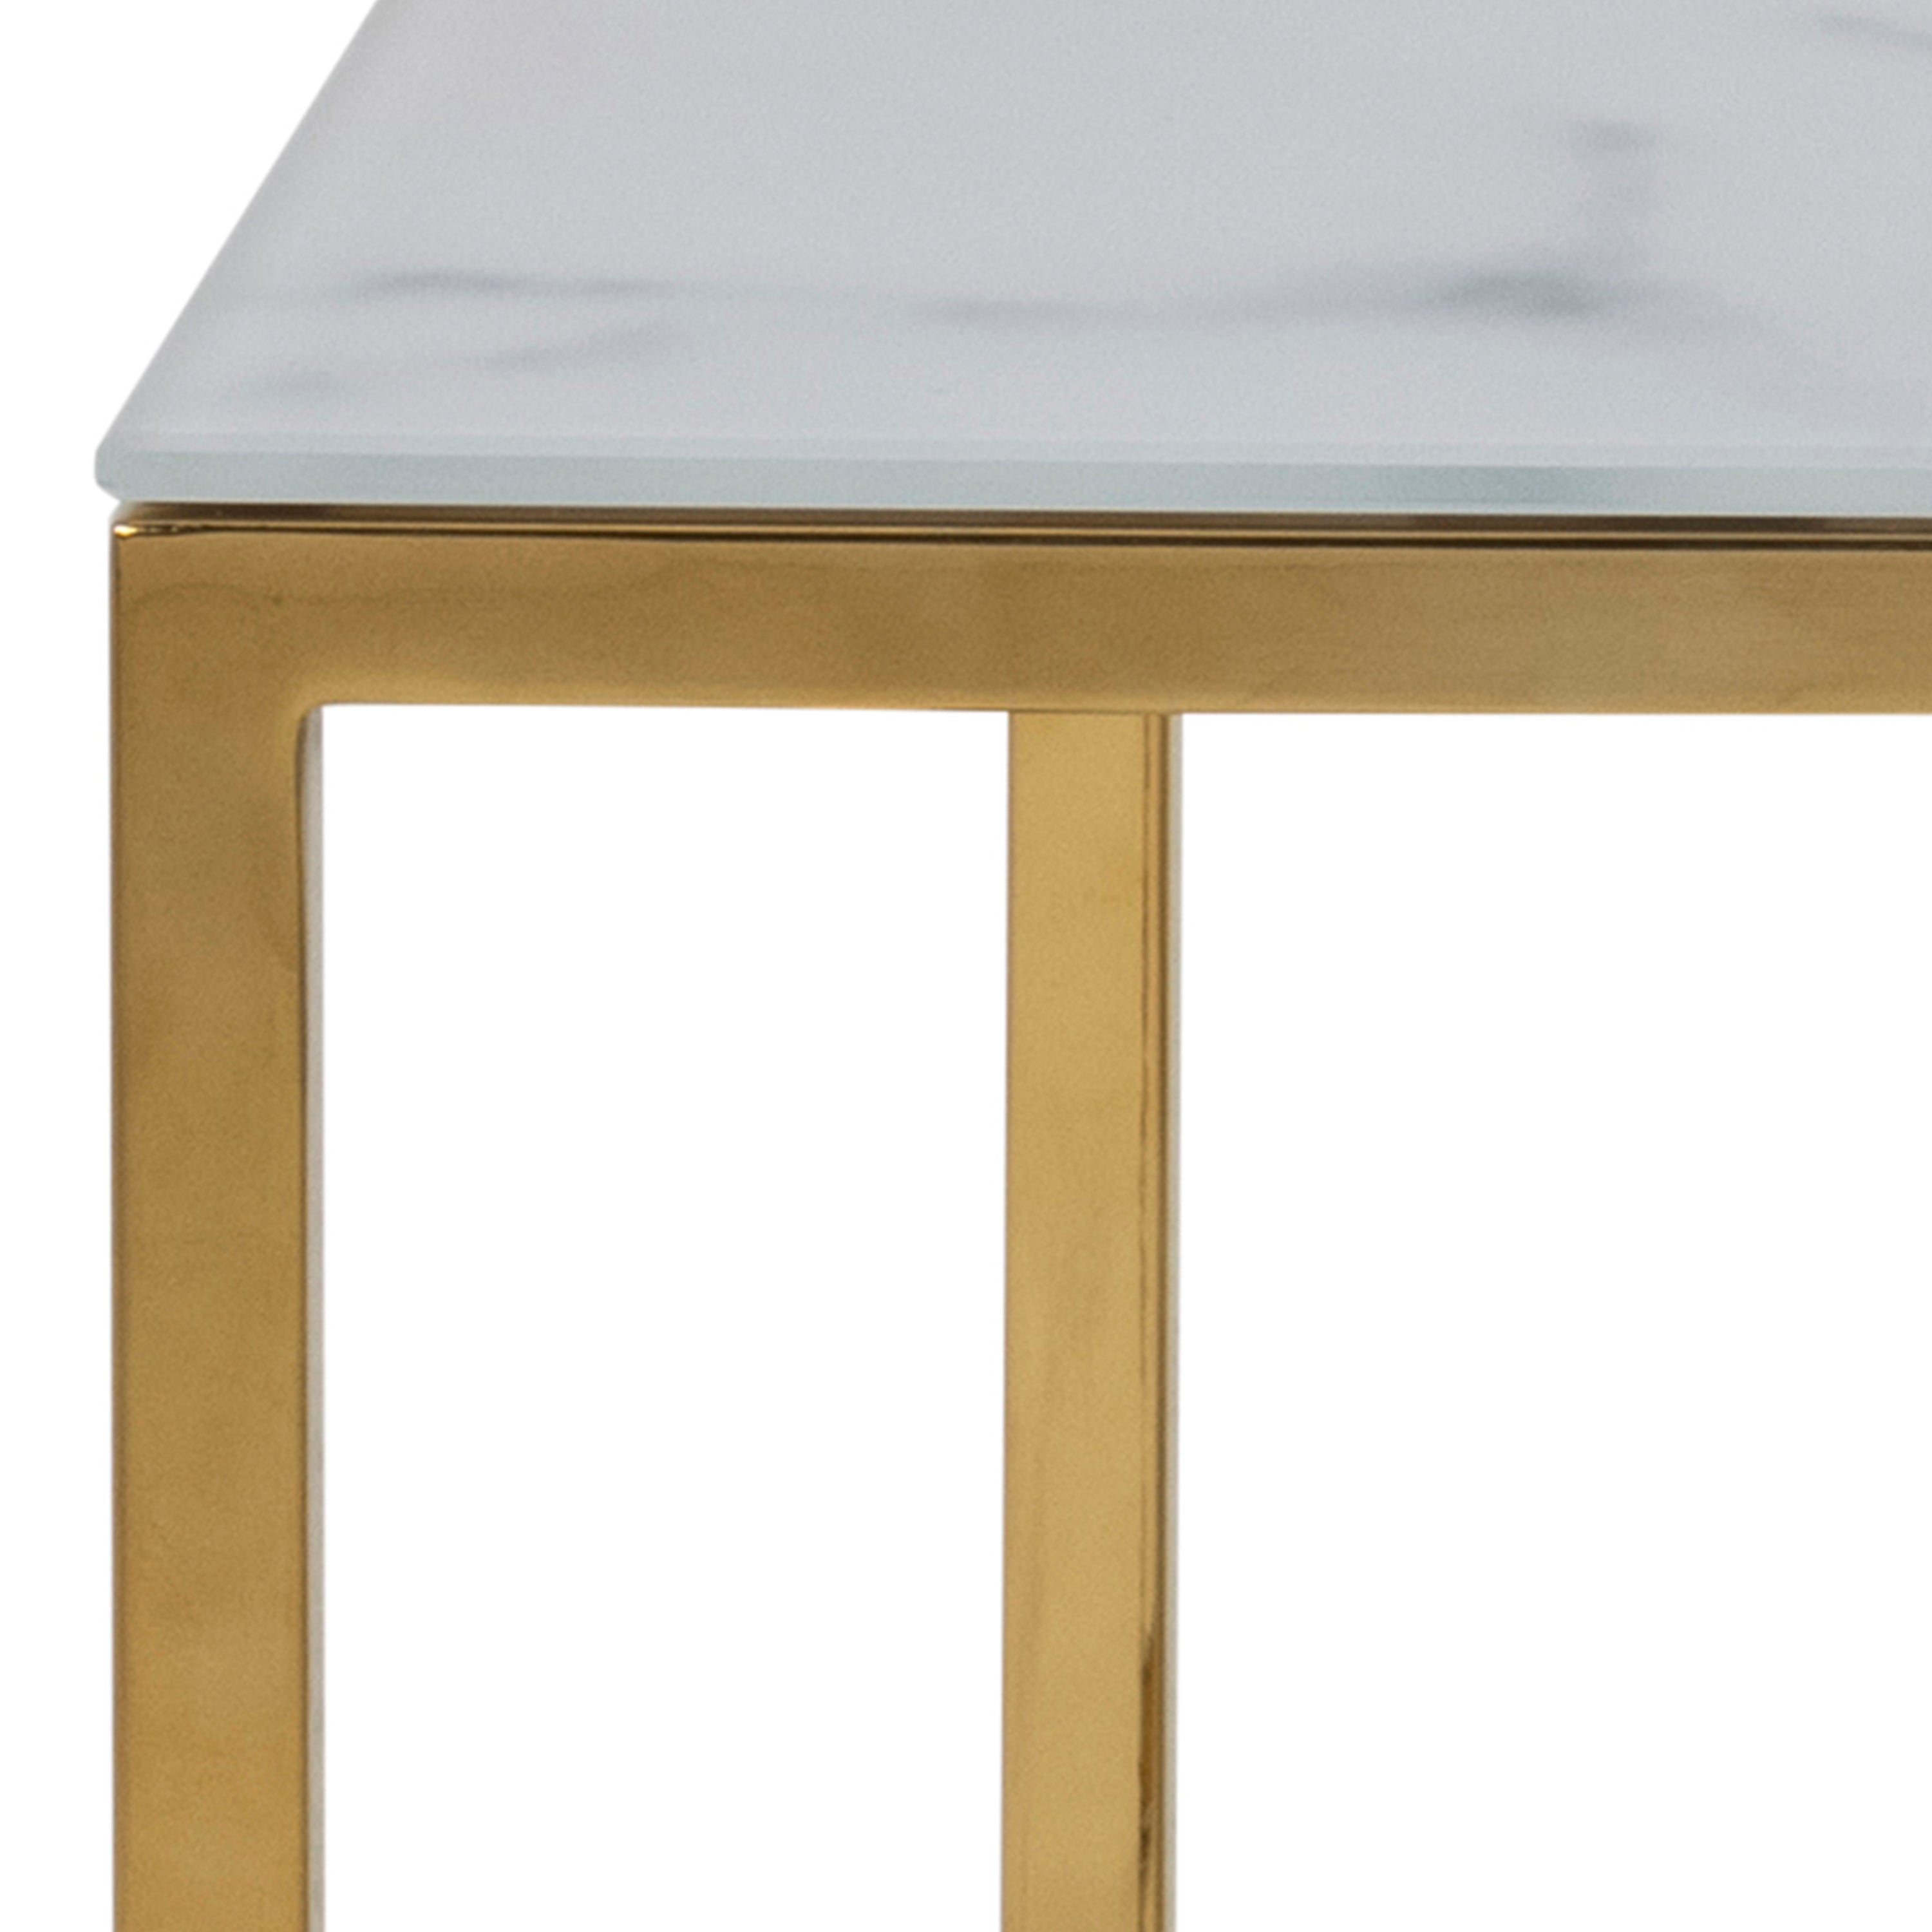 Alisma Open Shelf Coffee Table with White Marble Effect & Gold Legs